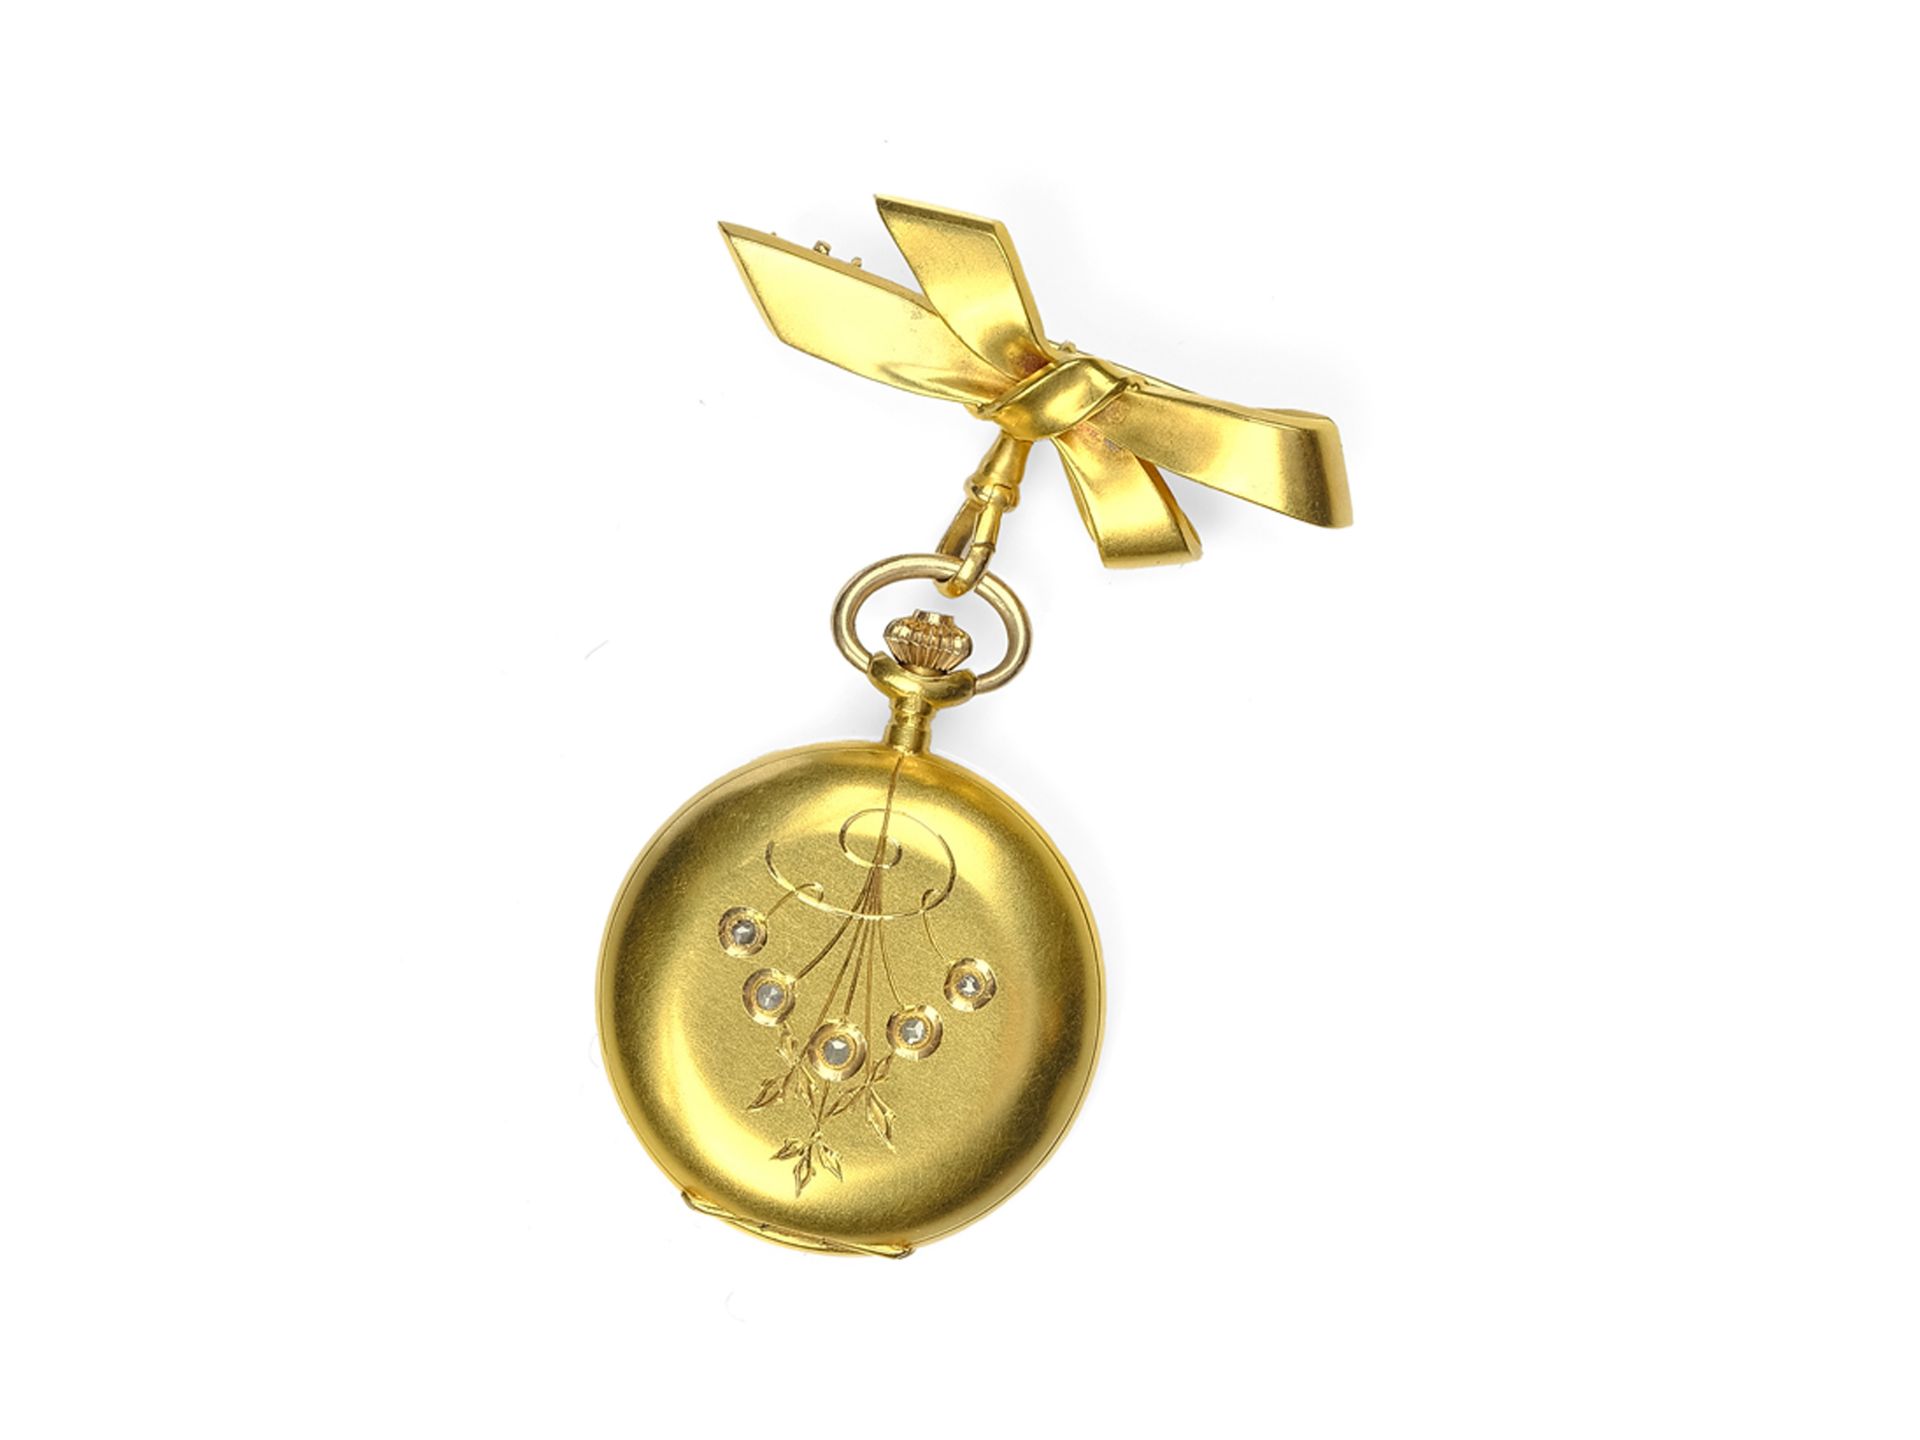 Small ladies' pocket watch, with brooch, around 1900 - Image 2 of 3